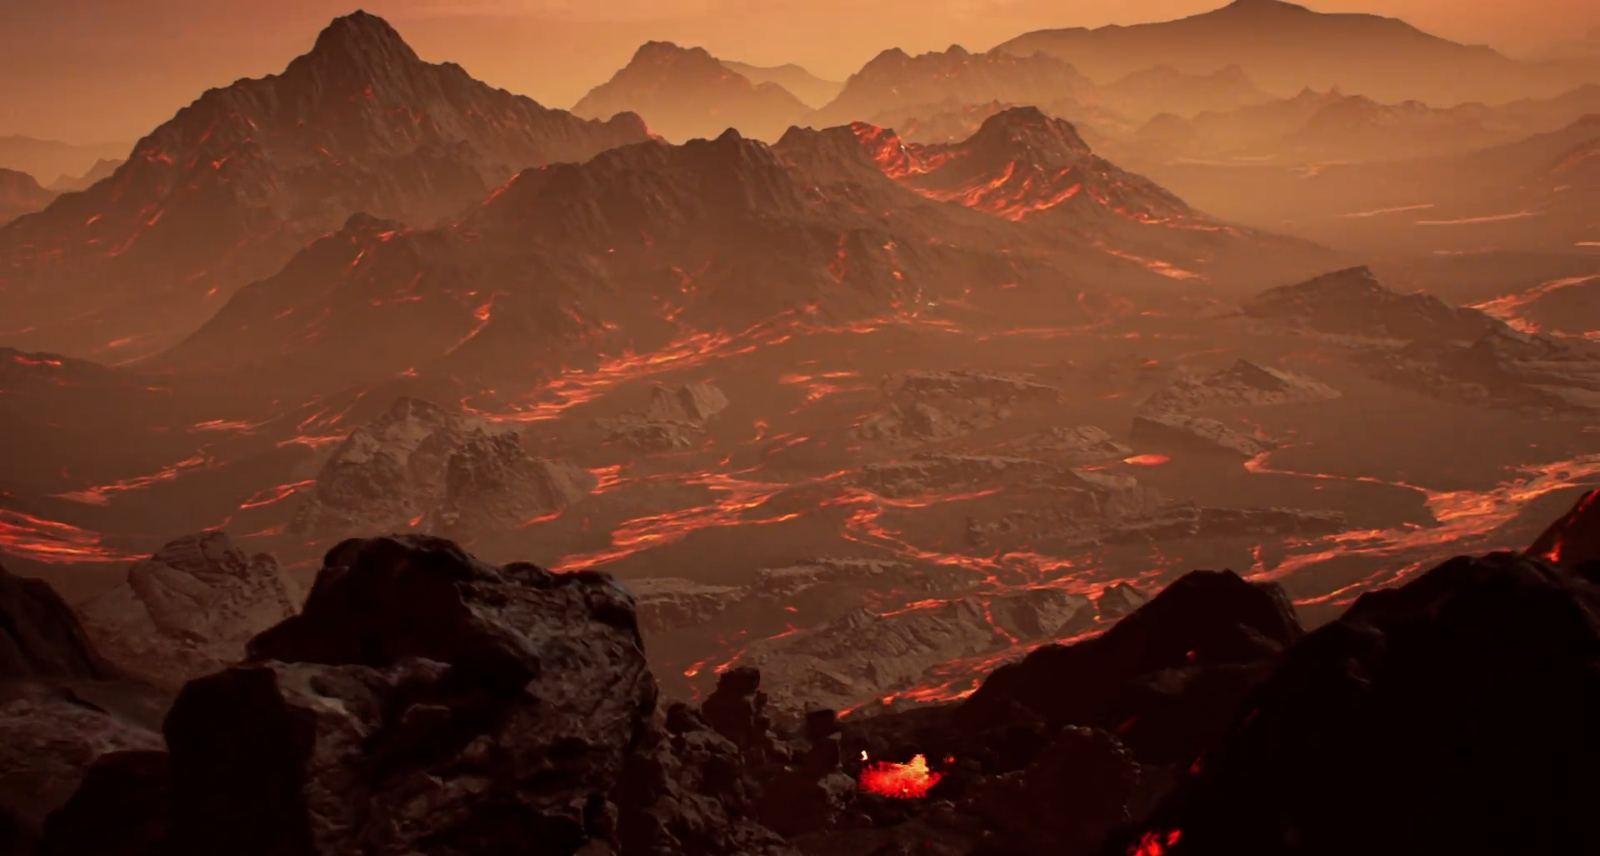 Gliese 486b is a hellish world with temperatures above 700 Kelvin